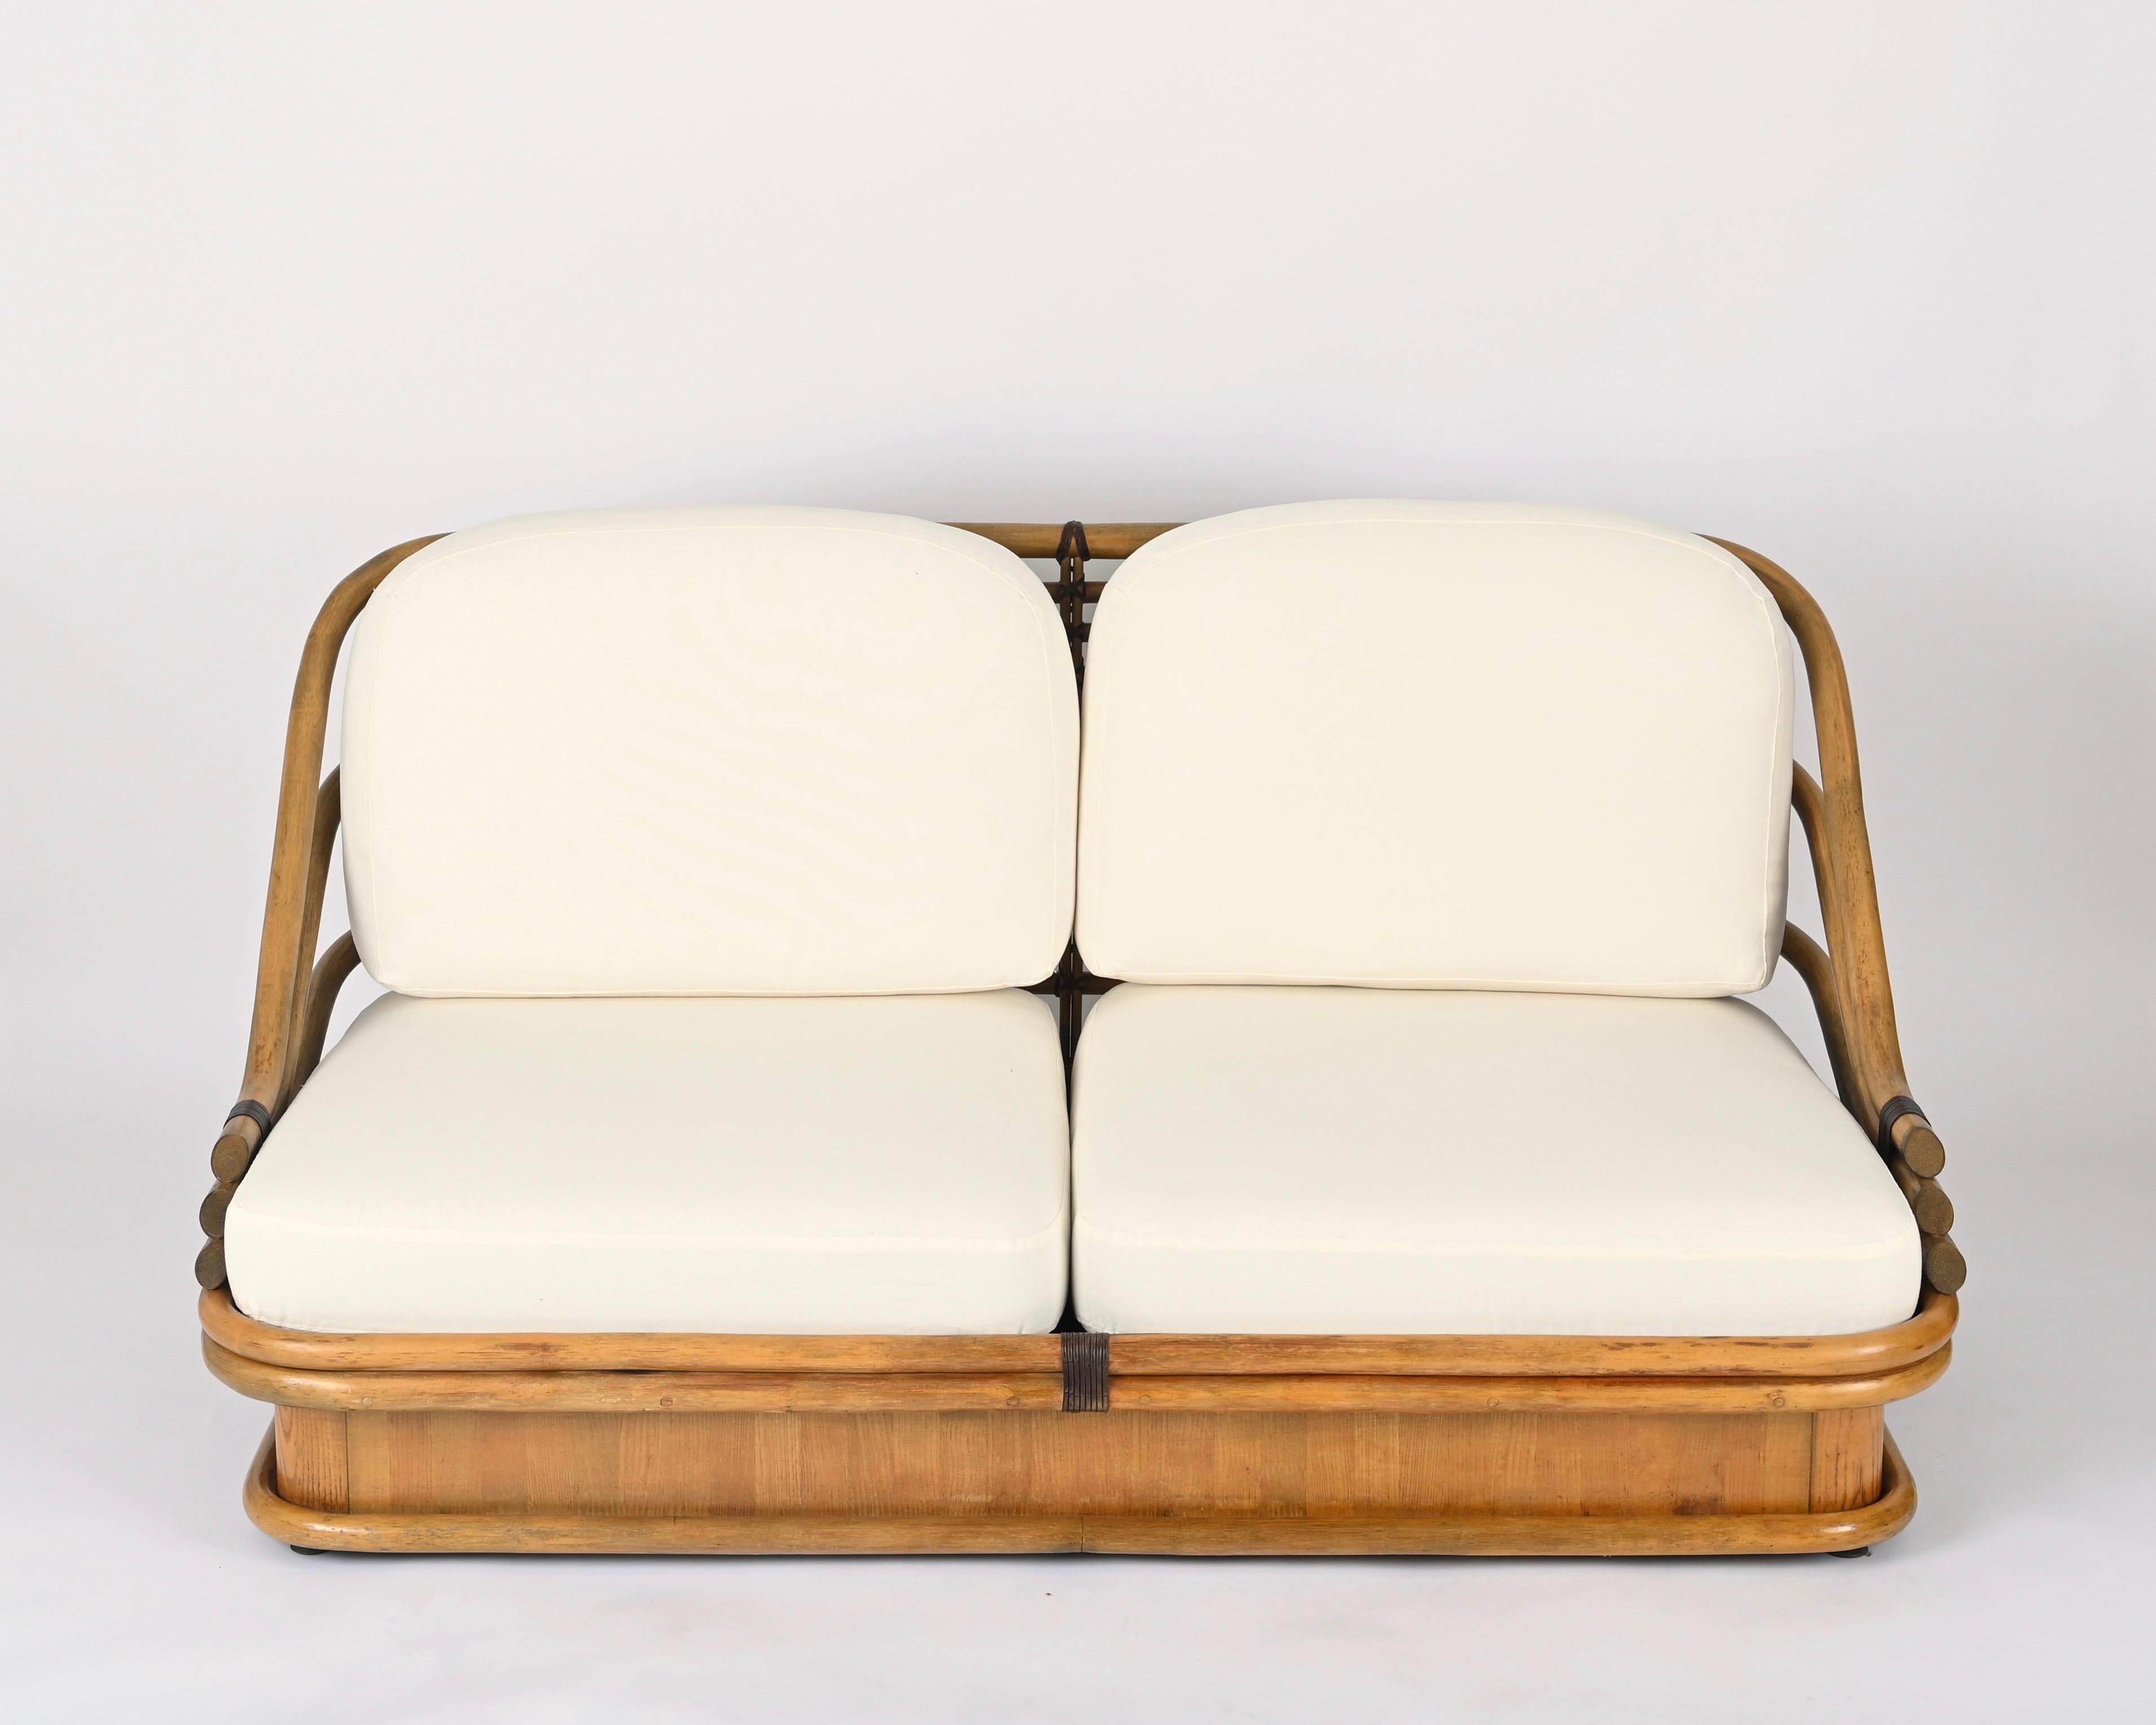 Midcentury Curved Bamboo, Maple and Leather Italian Sofa, White Fabric, 1960s For Sale 6